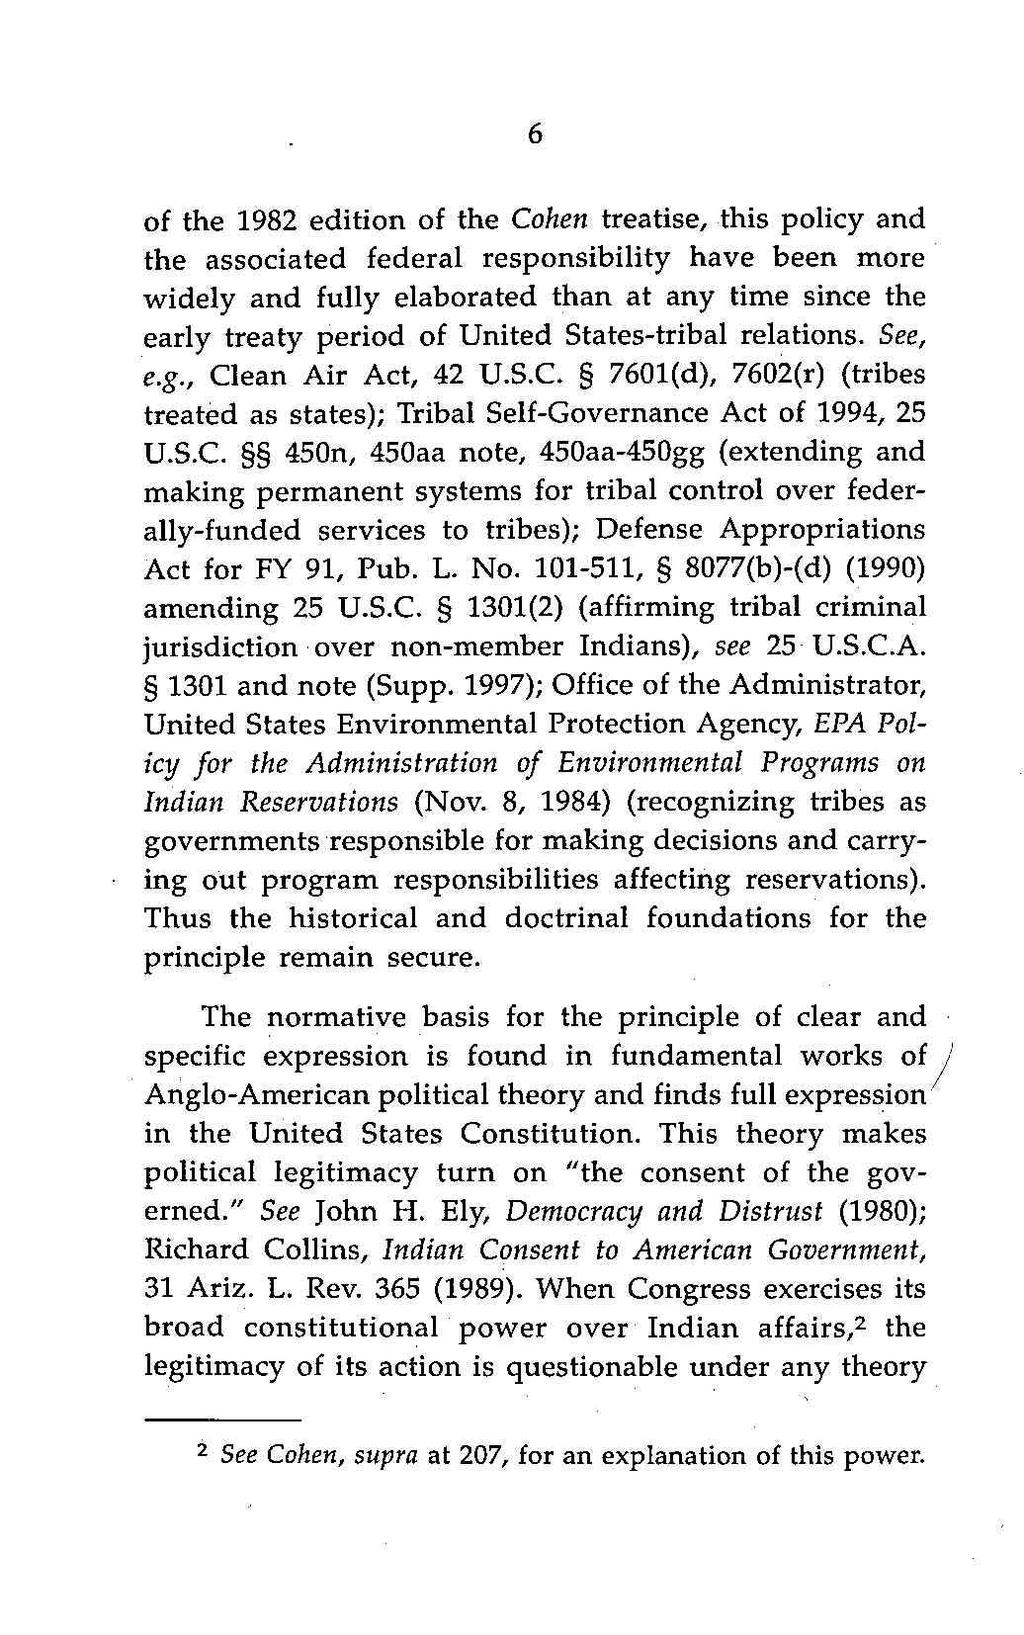 6 of the 1982 edition of the Cohen treatise, this policy and the associated federal responsibility have been more widely and fully elaborated than at any time since the early treaty period of United